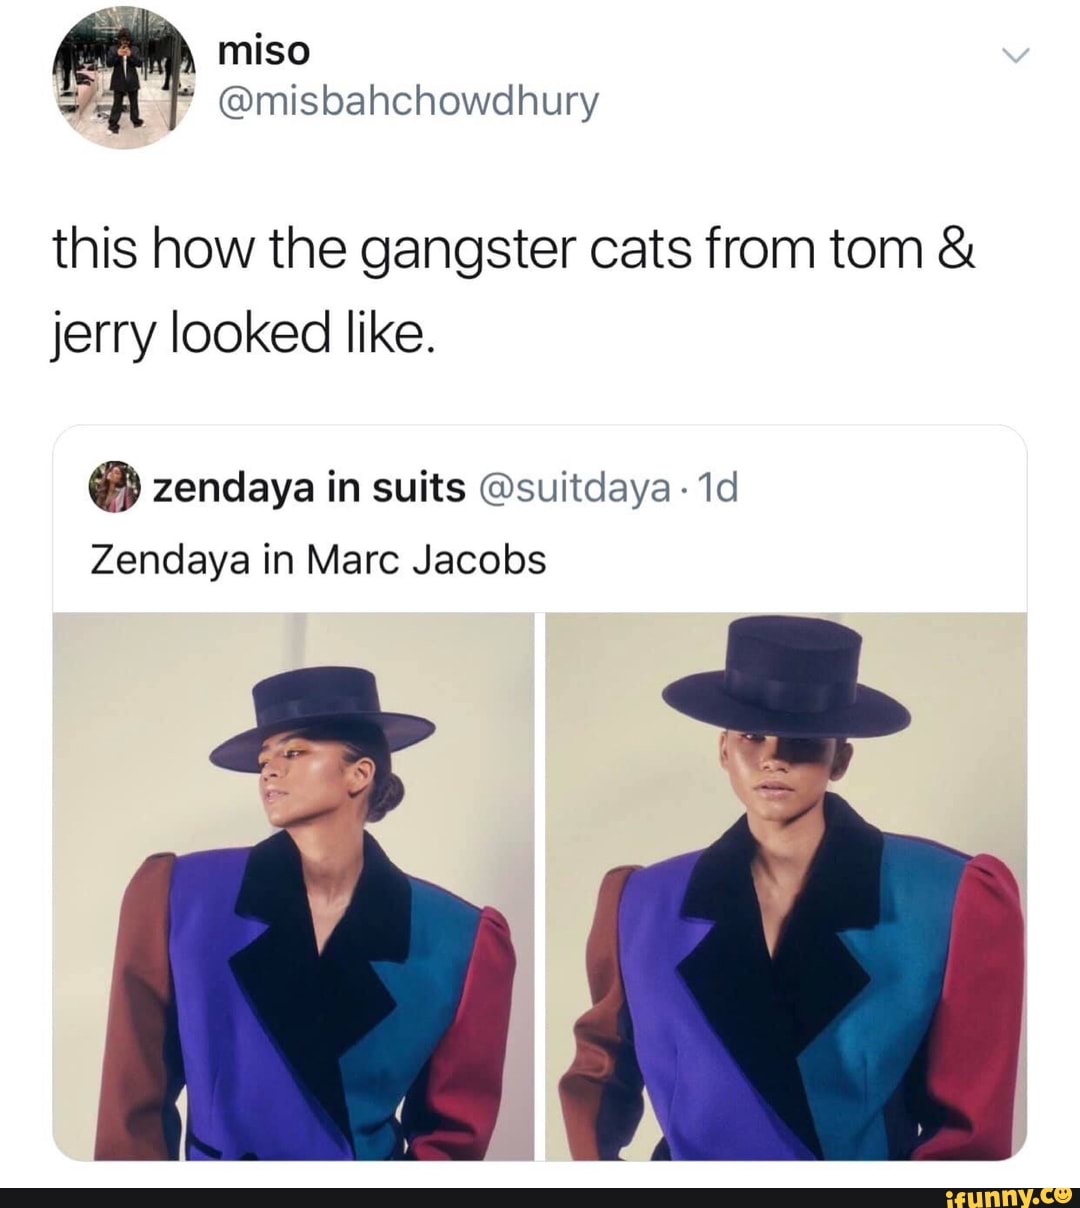 tom wearing a suit tom and jerry｜TikTok Search